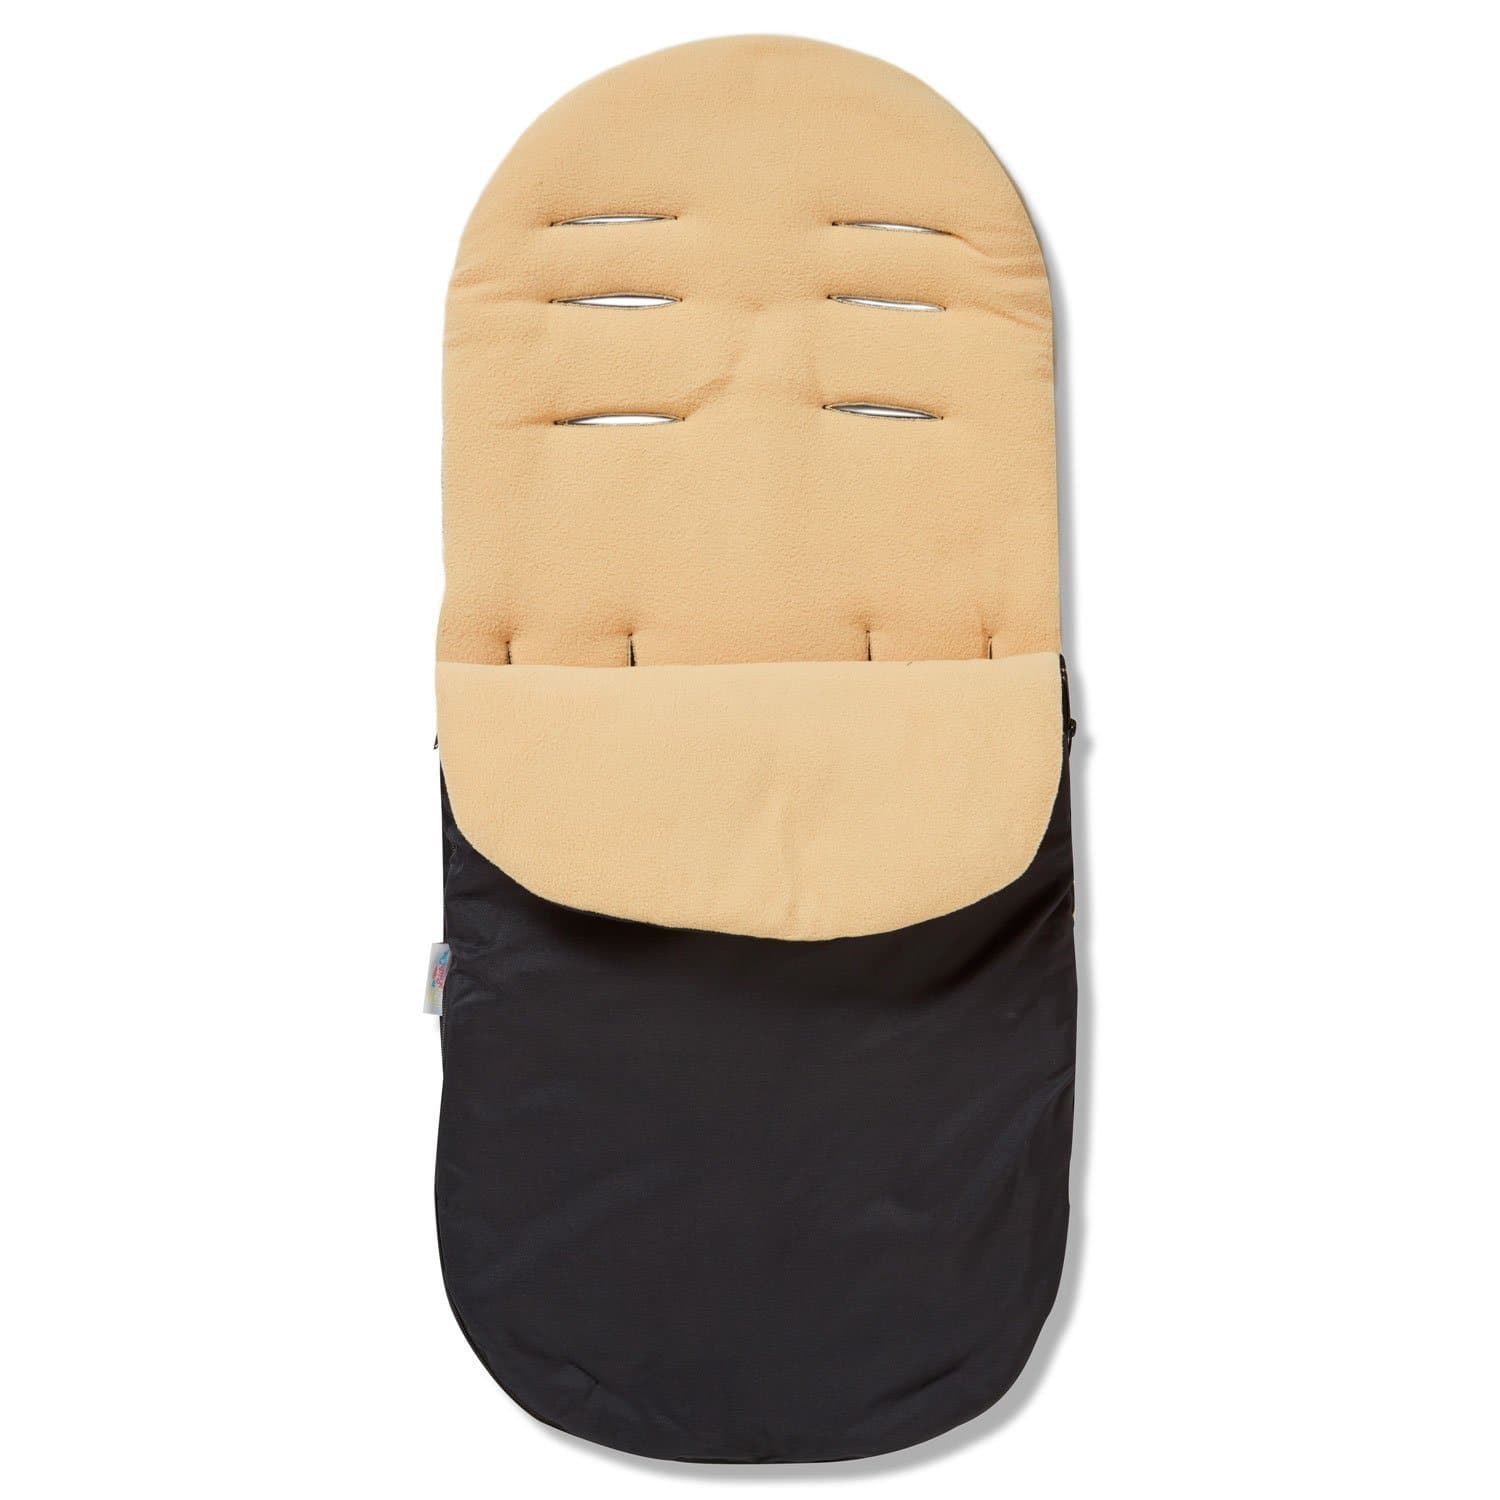 Footmuff / Cosy Toes Compatible with Bebe Confort - Sand / Fits All Models | For Your Little One